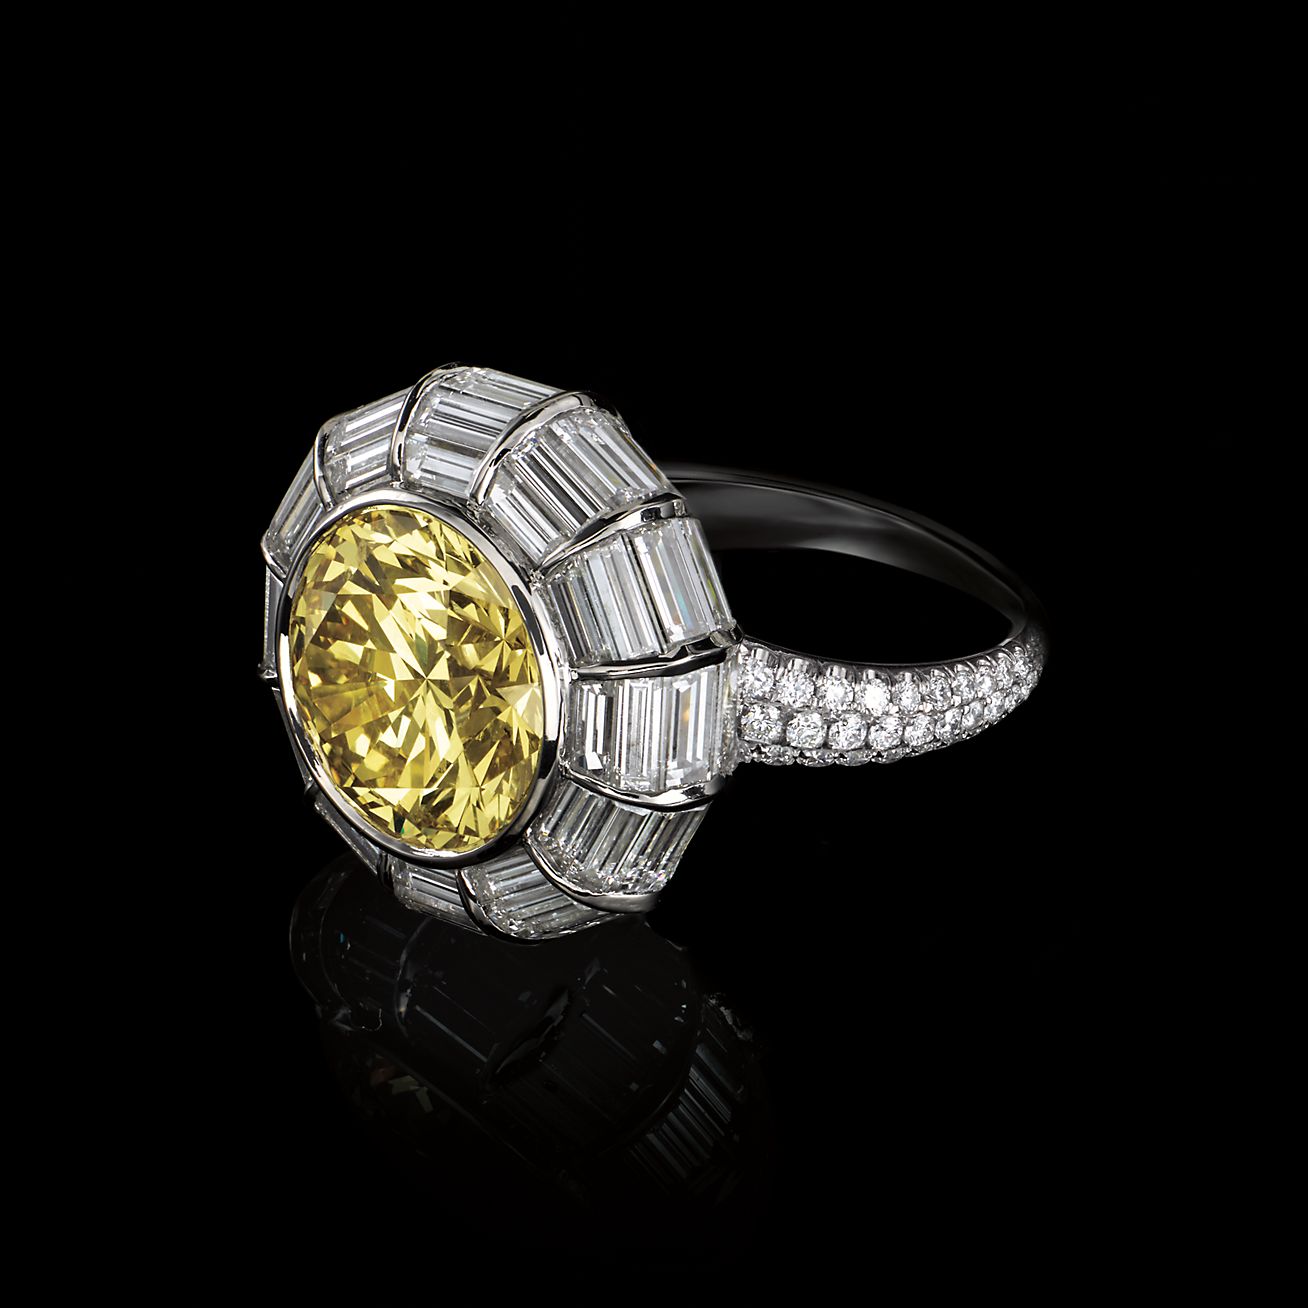 Ring in platinum with a 5.67-carat Fancy Vivid Yellow diamond 